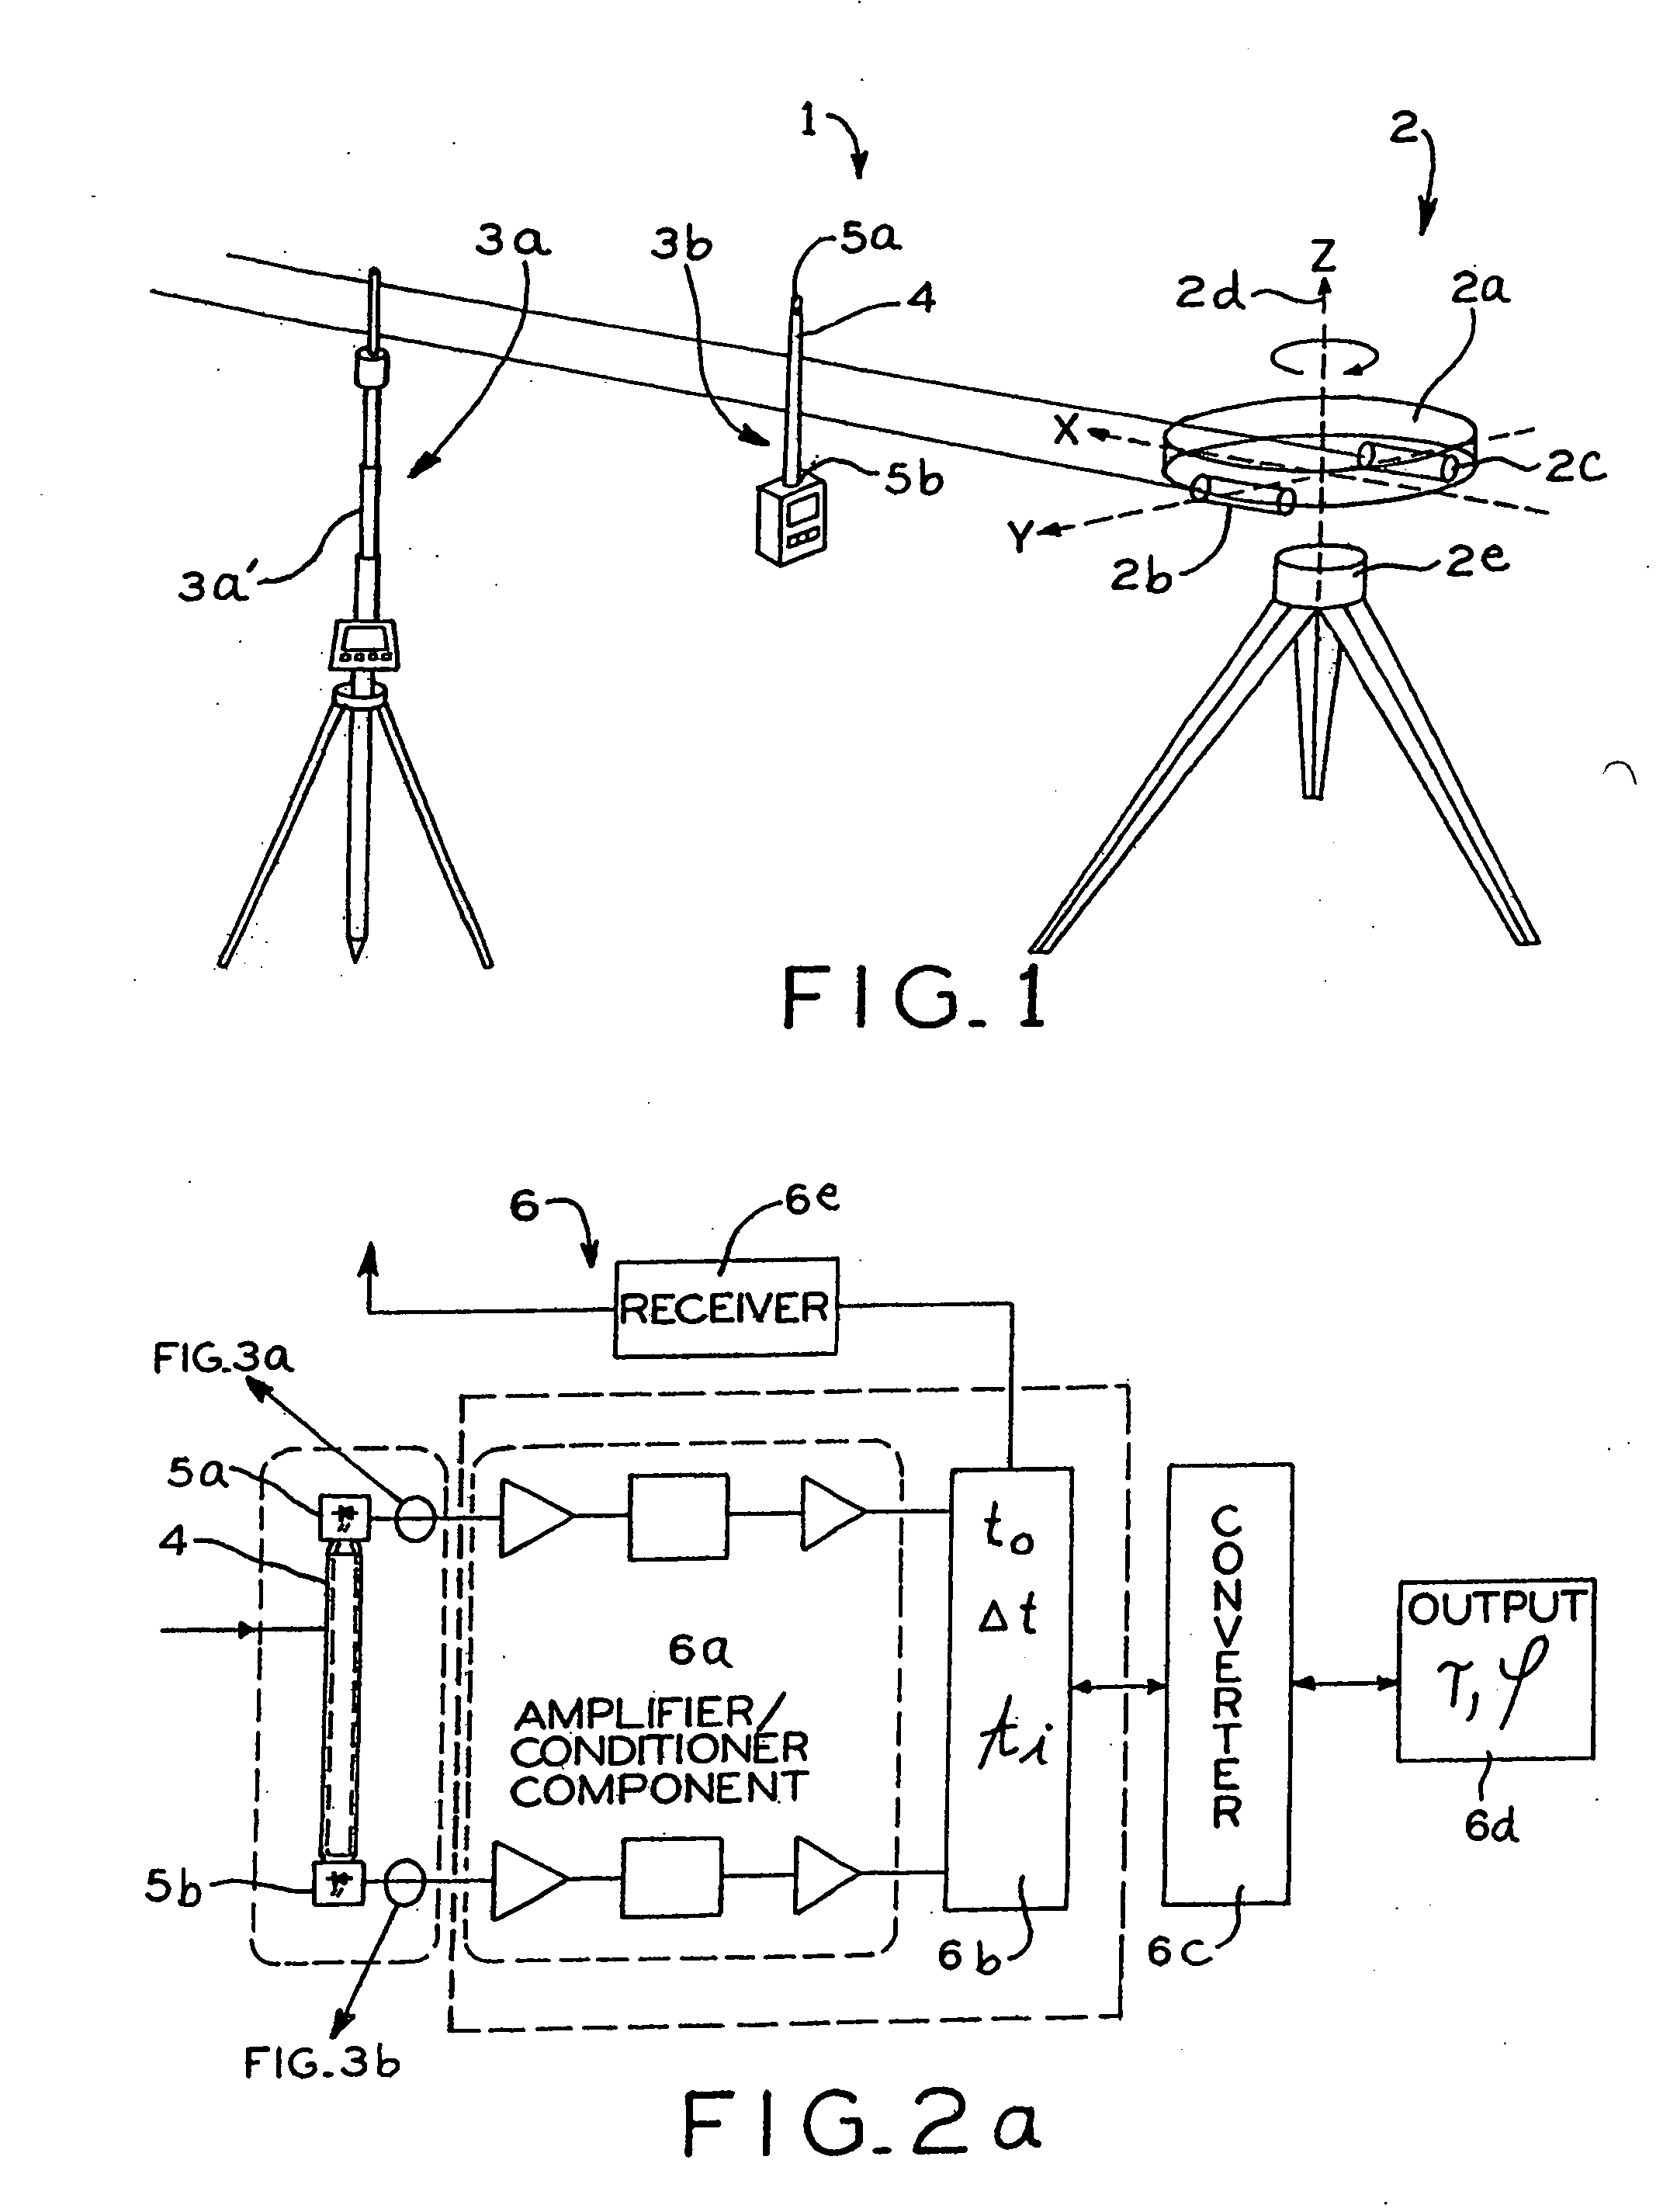 Measuring device and measuring method for determining distance and/or position